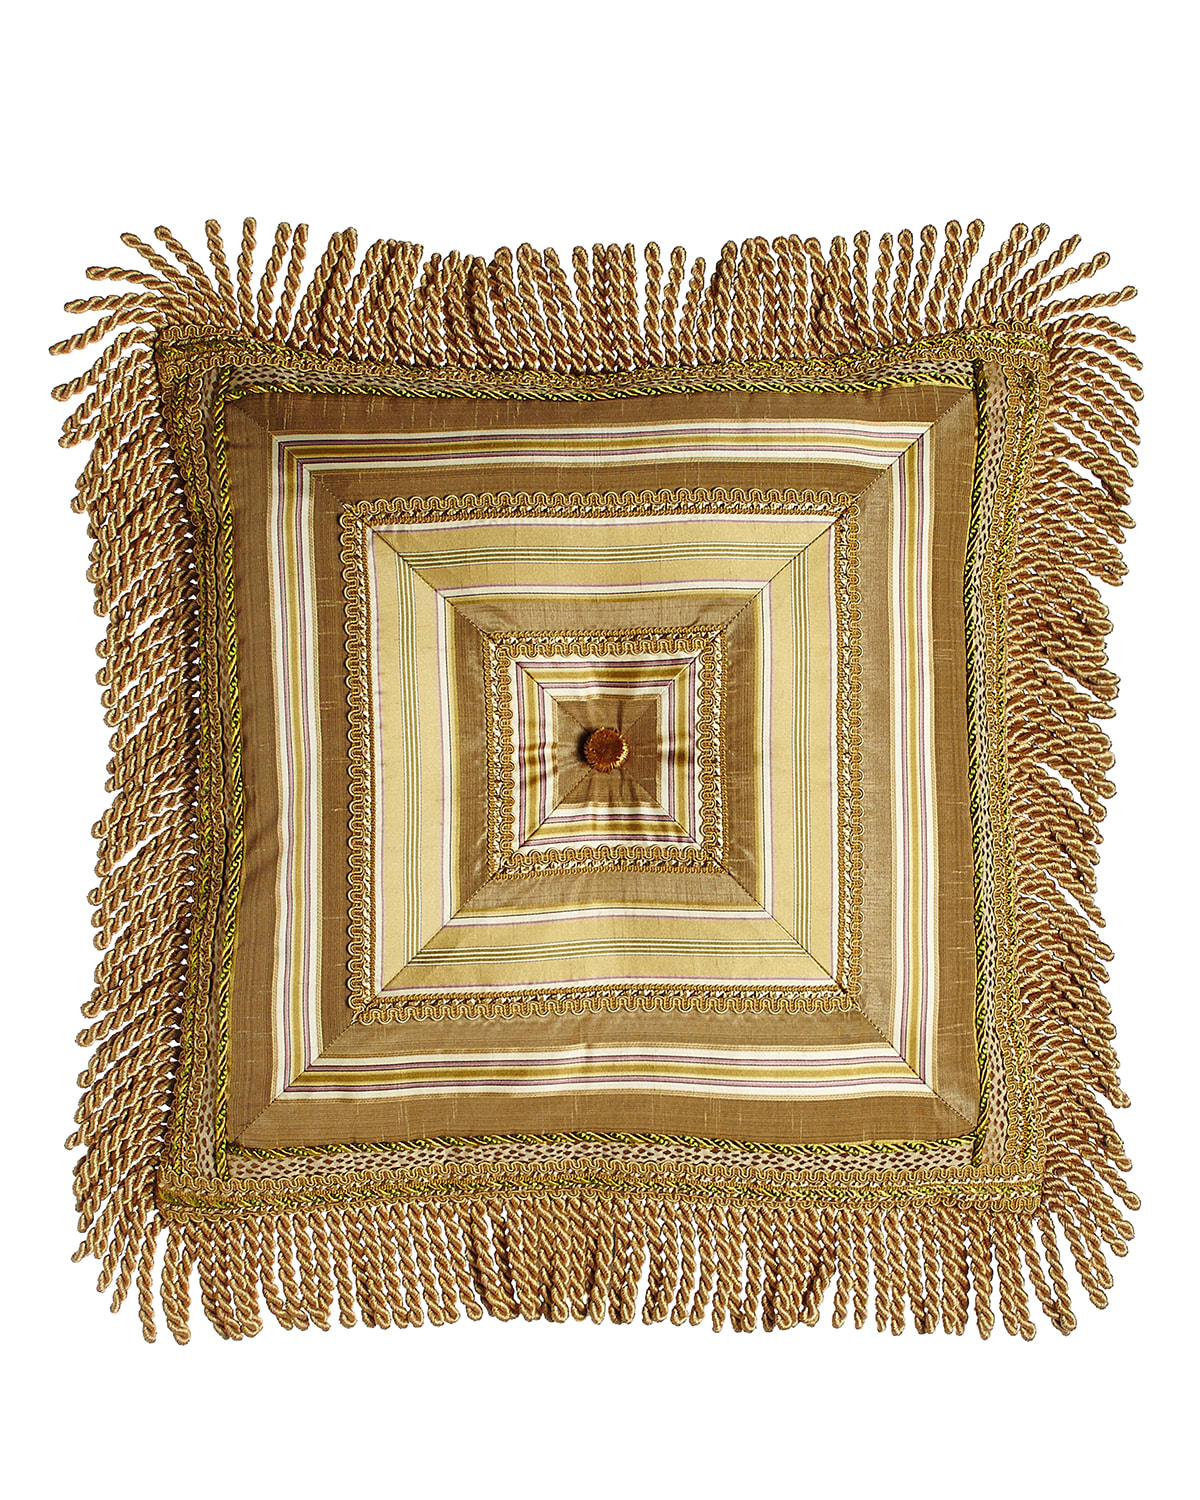 Image Sweet Dreams Mitered-Stripe Pillow with Gimp Accents & Bullion Fringe, 18"Sq.